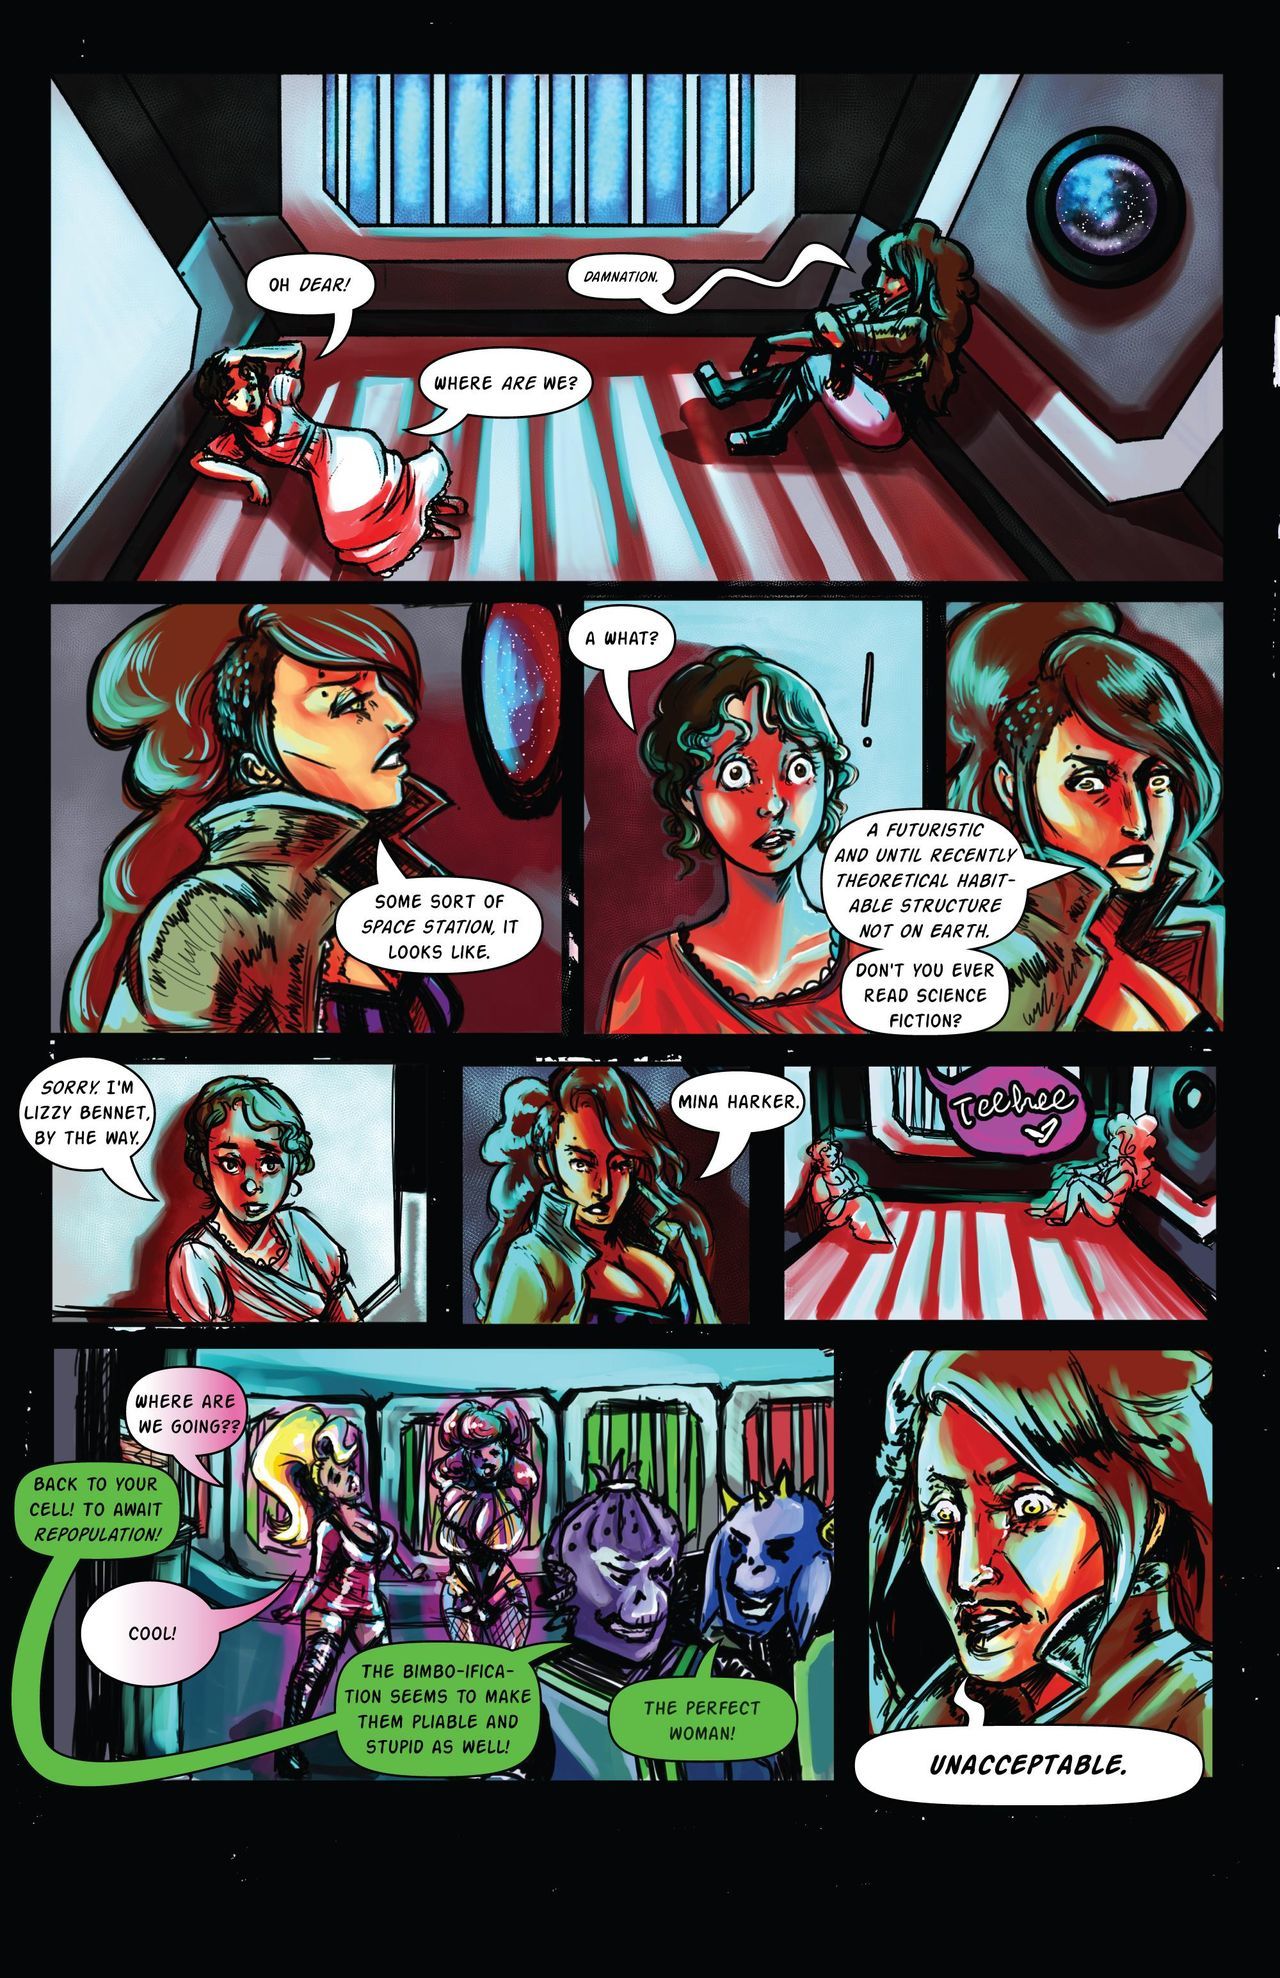 Bimbos in Space Titillation Initiation by Trampy-Hime page 4